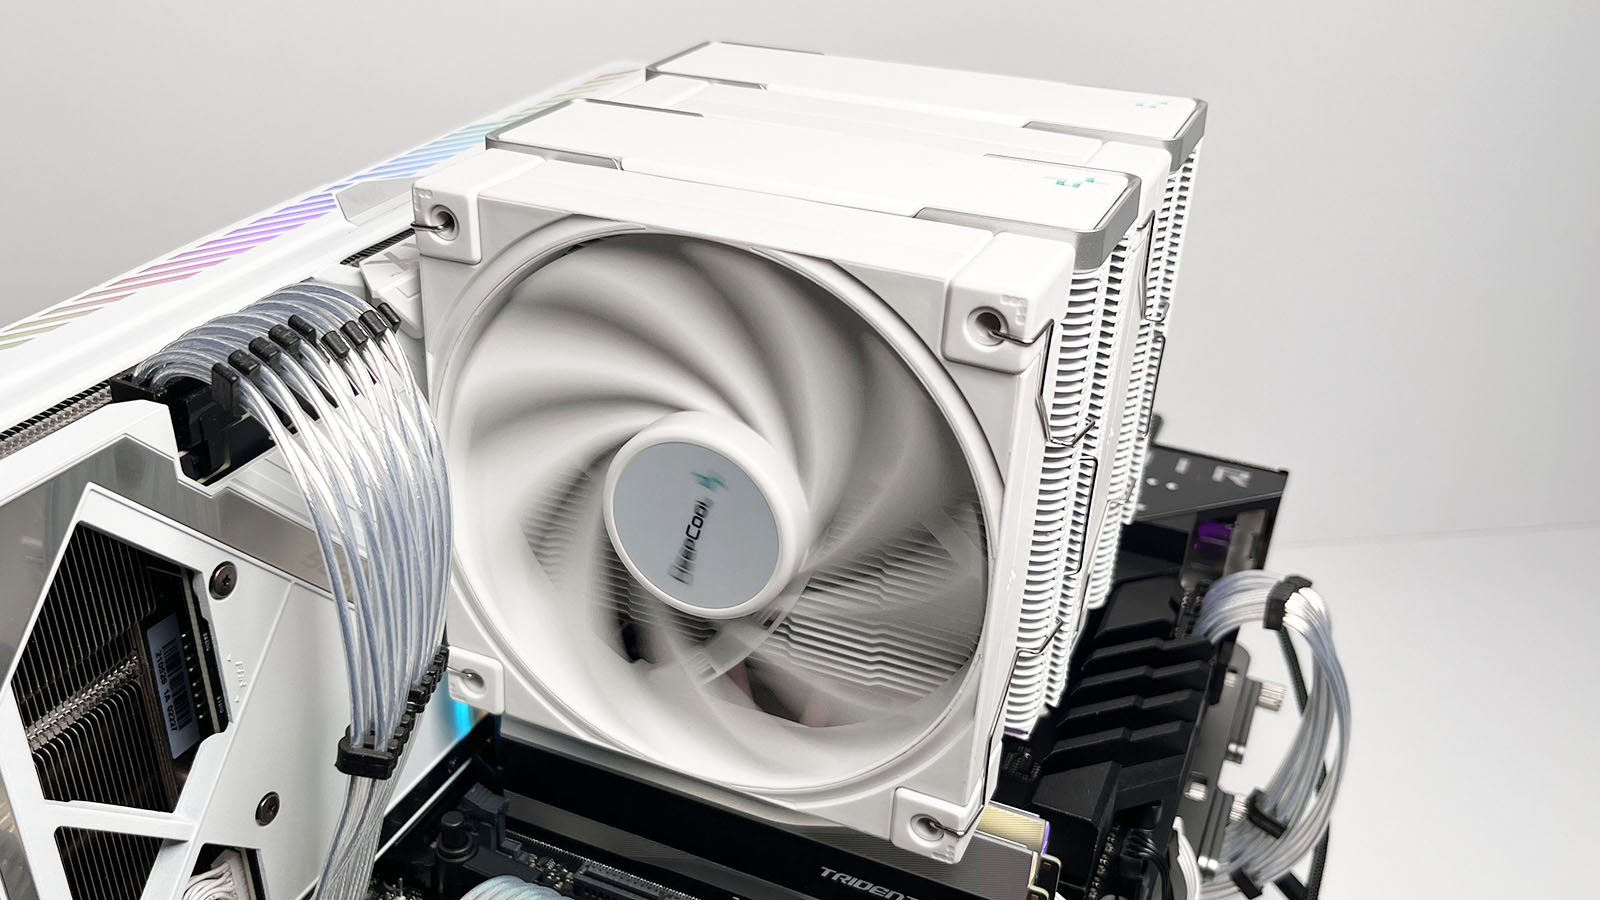 DeepCool AK620 CPU Cooler Review, Page 5 of 5